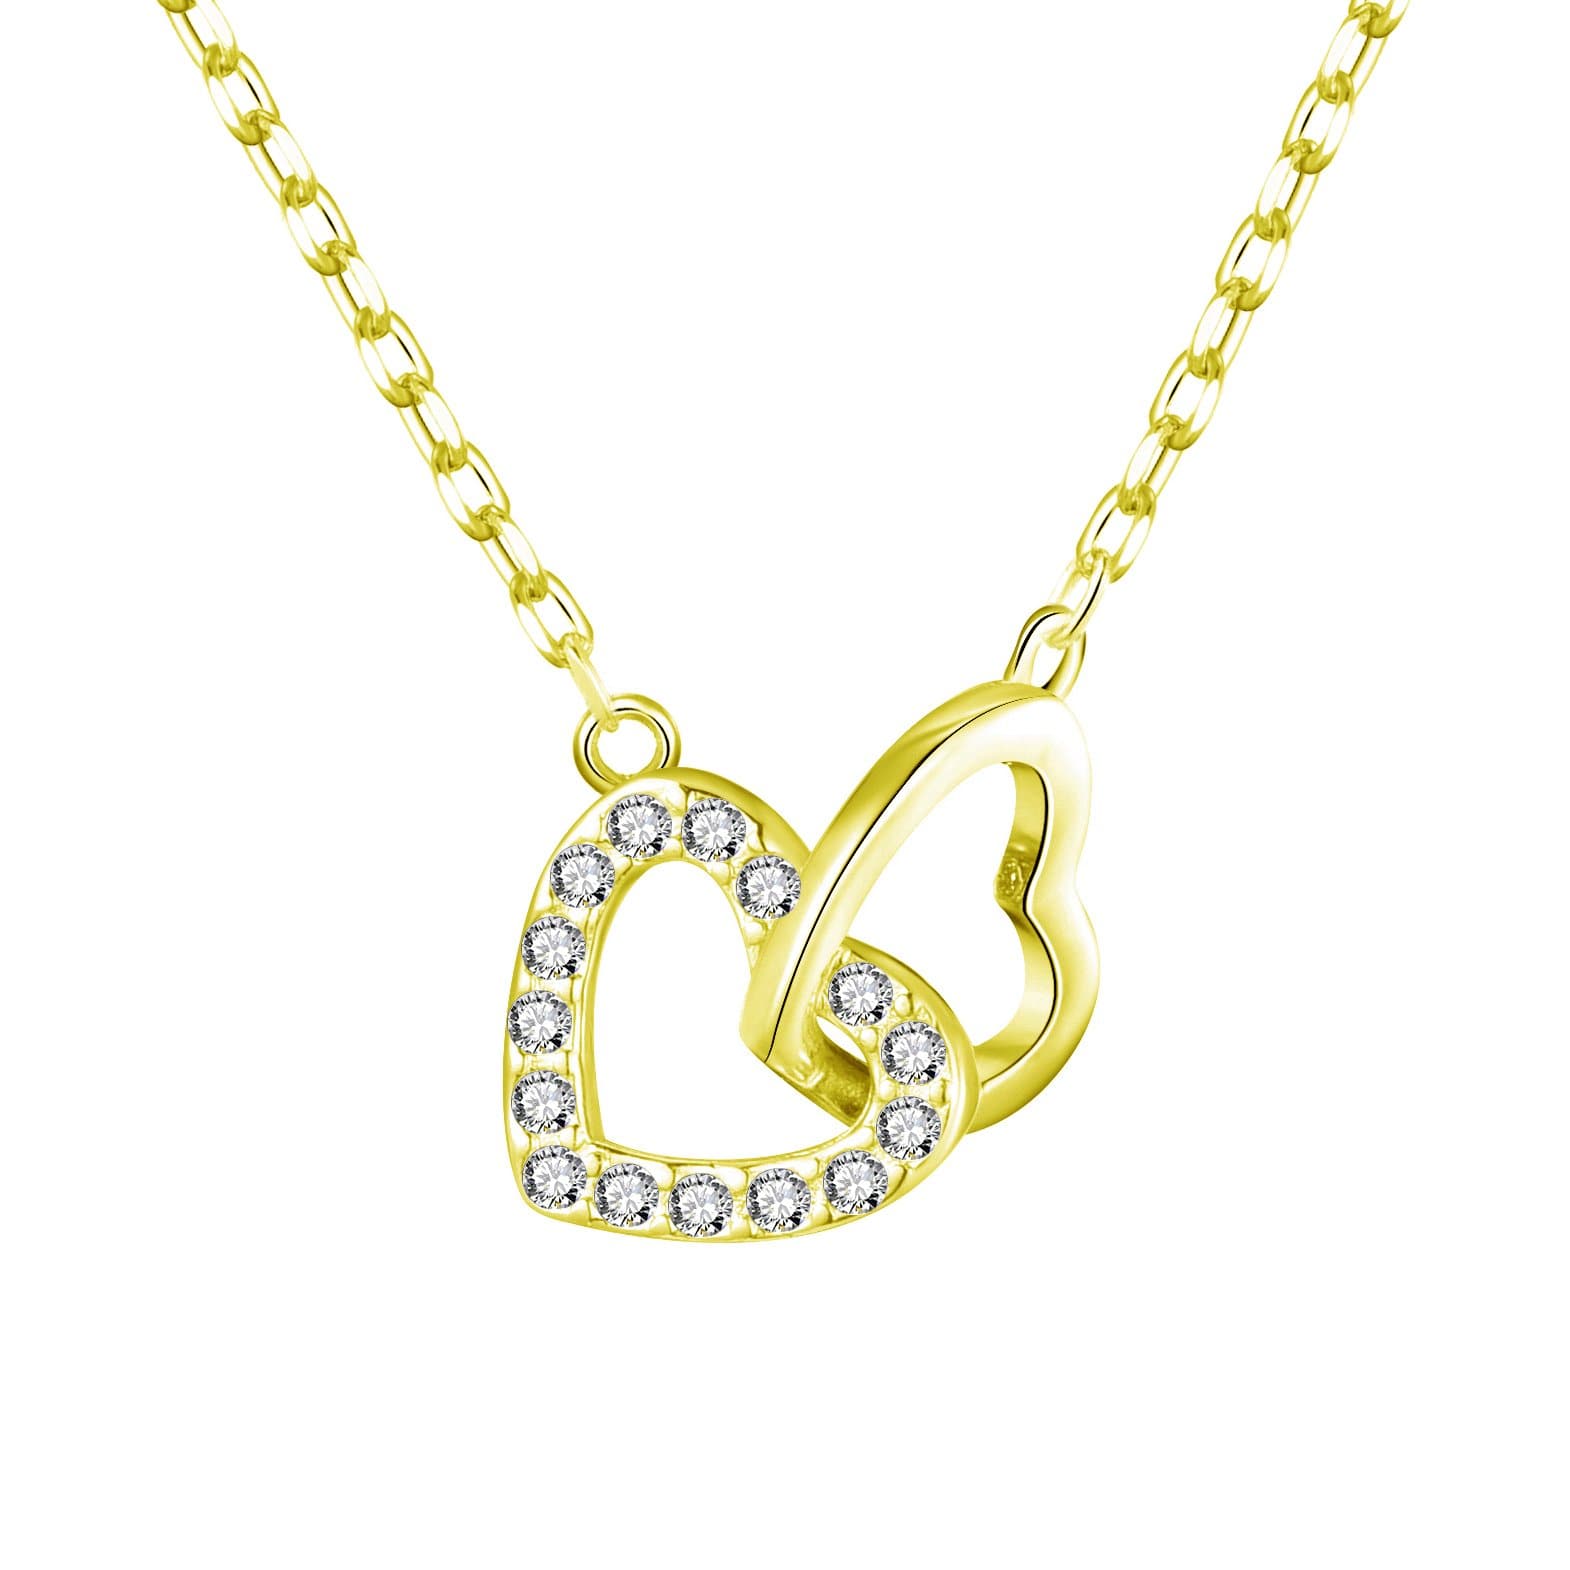 Gold Plated Heart Link Necklace Created with Zircondia® Crystals by Philip Jones Jewellery